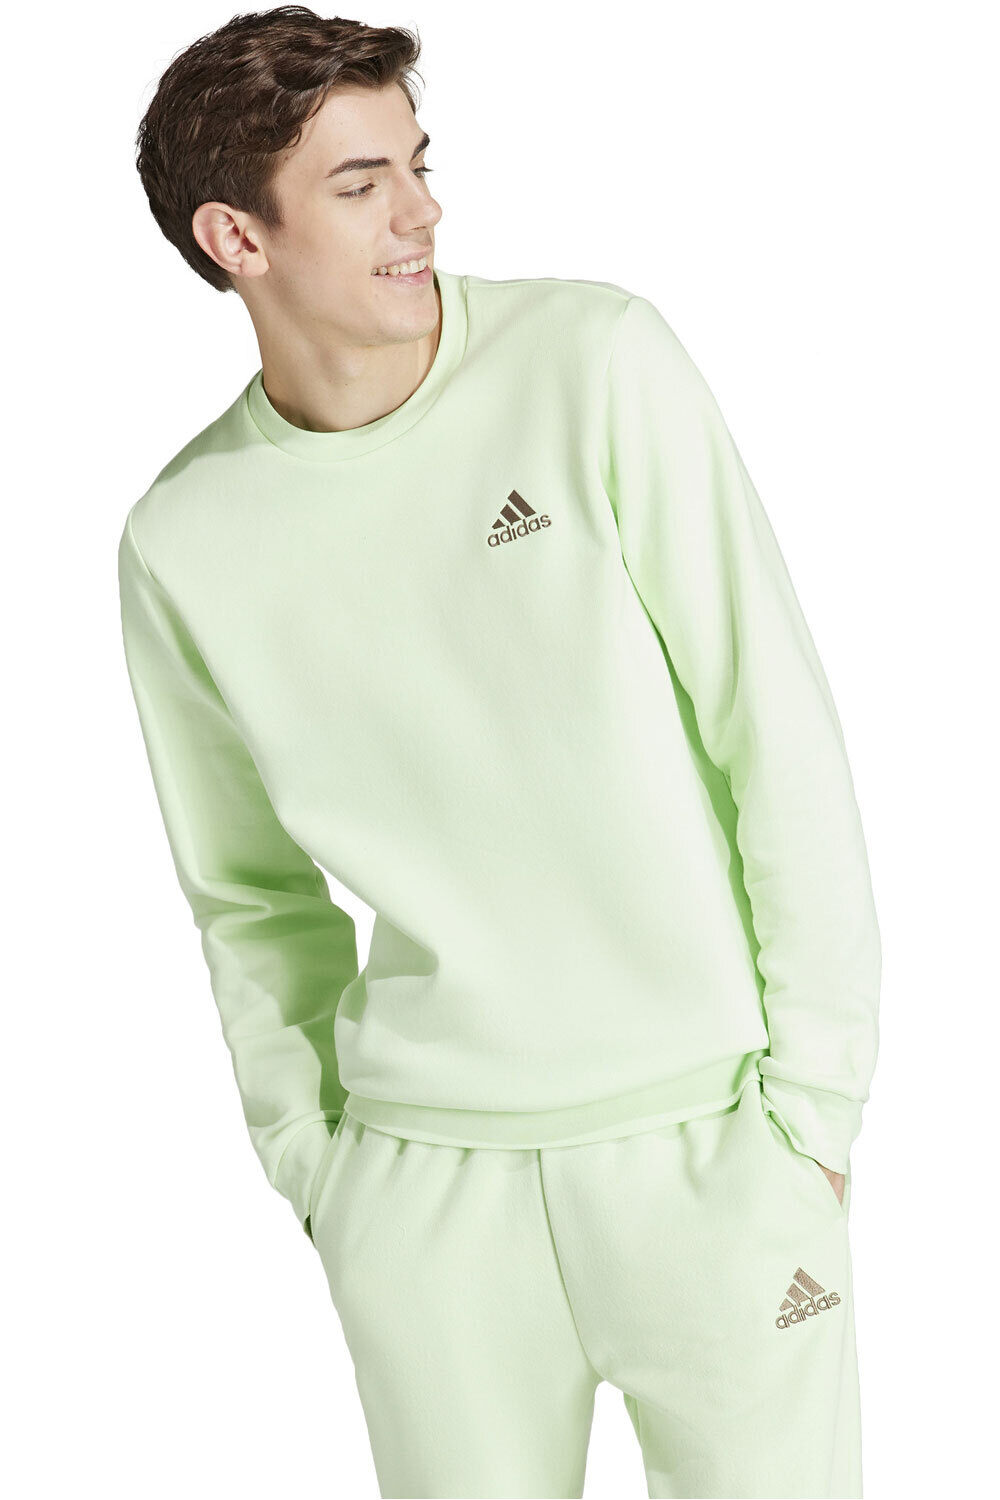 adidas chándal hombre M FEELCOZY SWT vista frontal